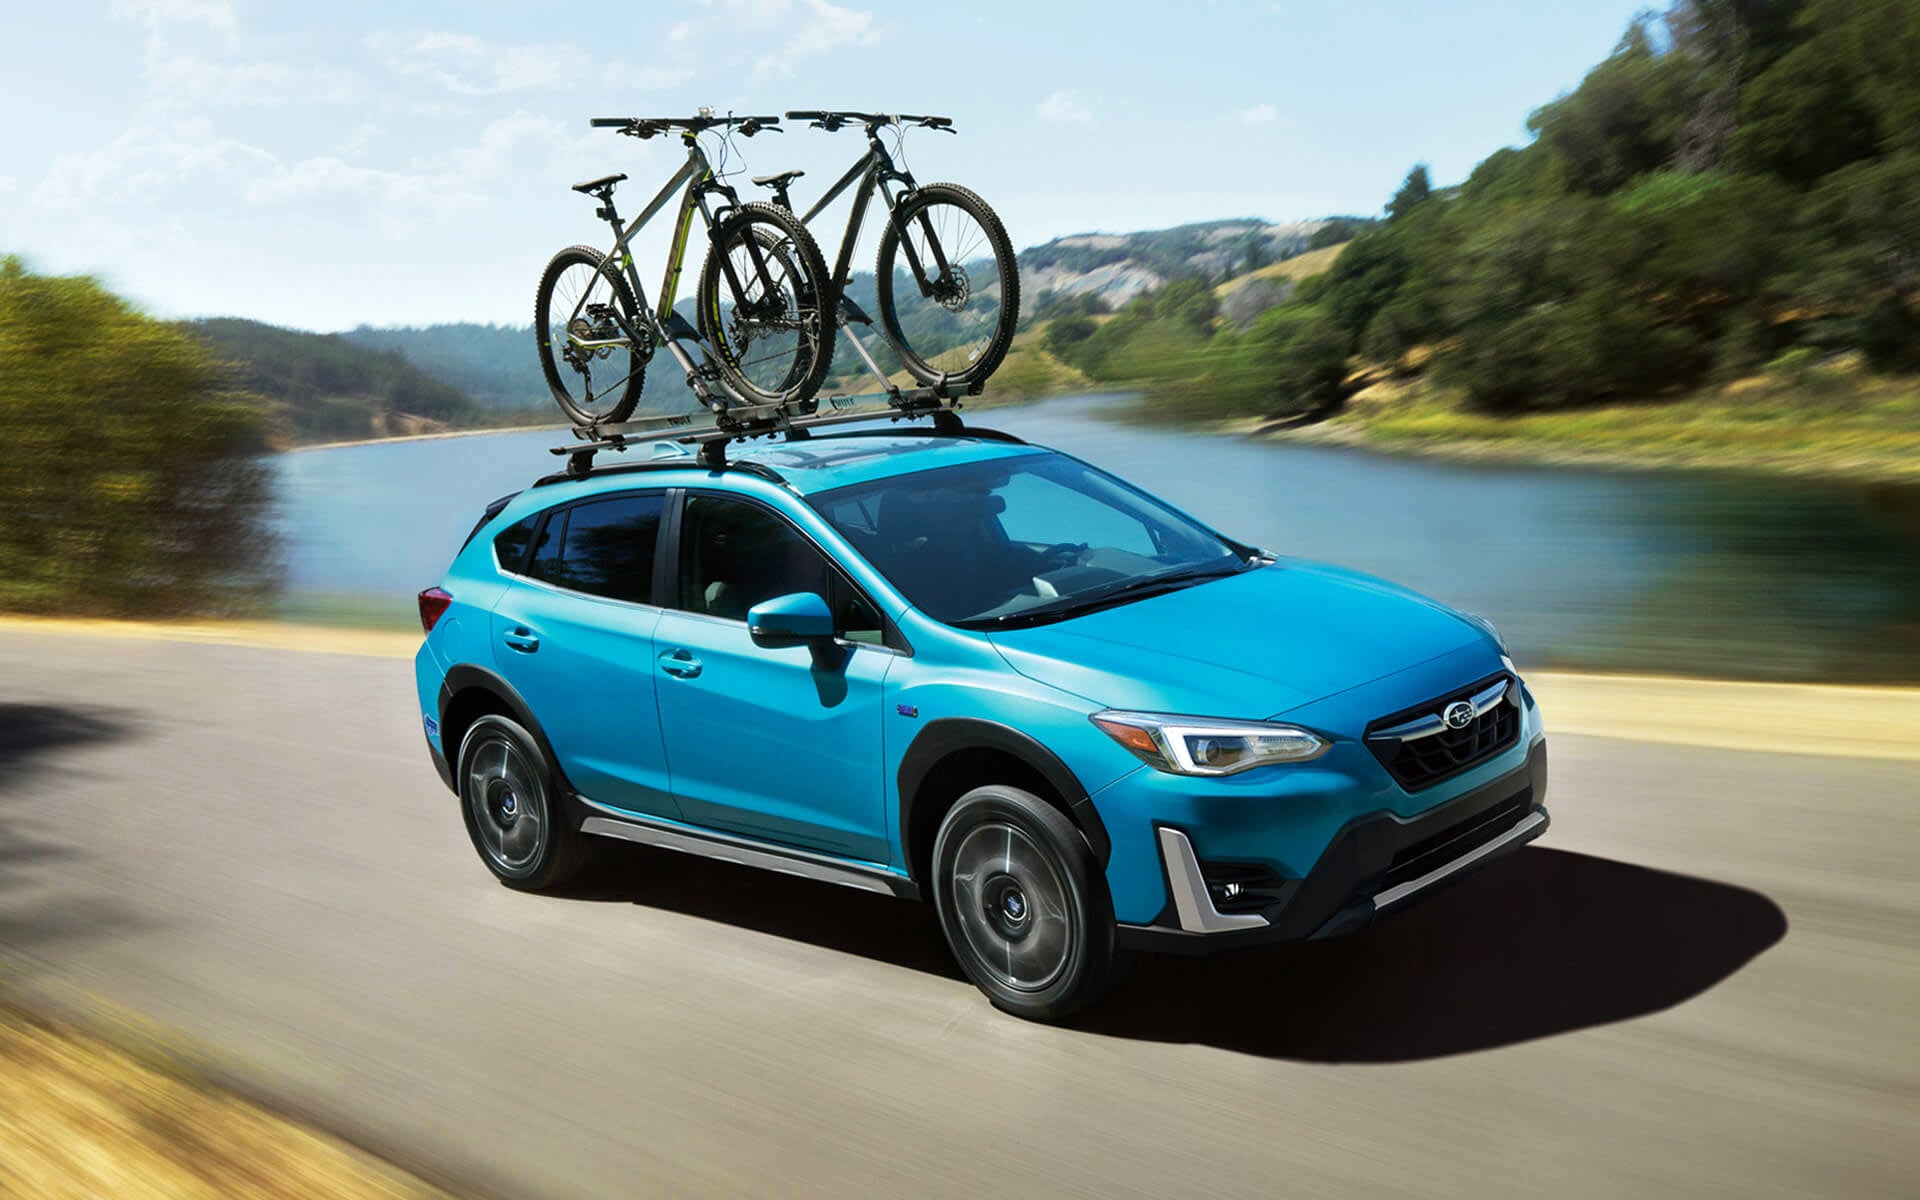 A blue Crosstrek Hybrid with two bicycles on its roof rack driving beside a river | Zappone Subaru Norwich in Norwich NY